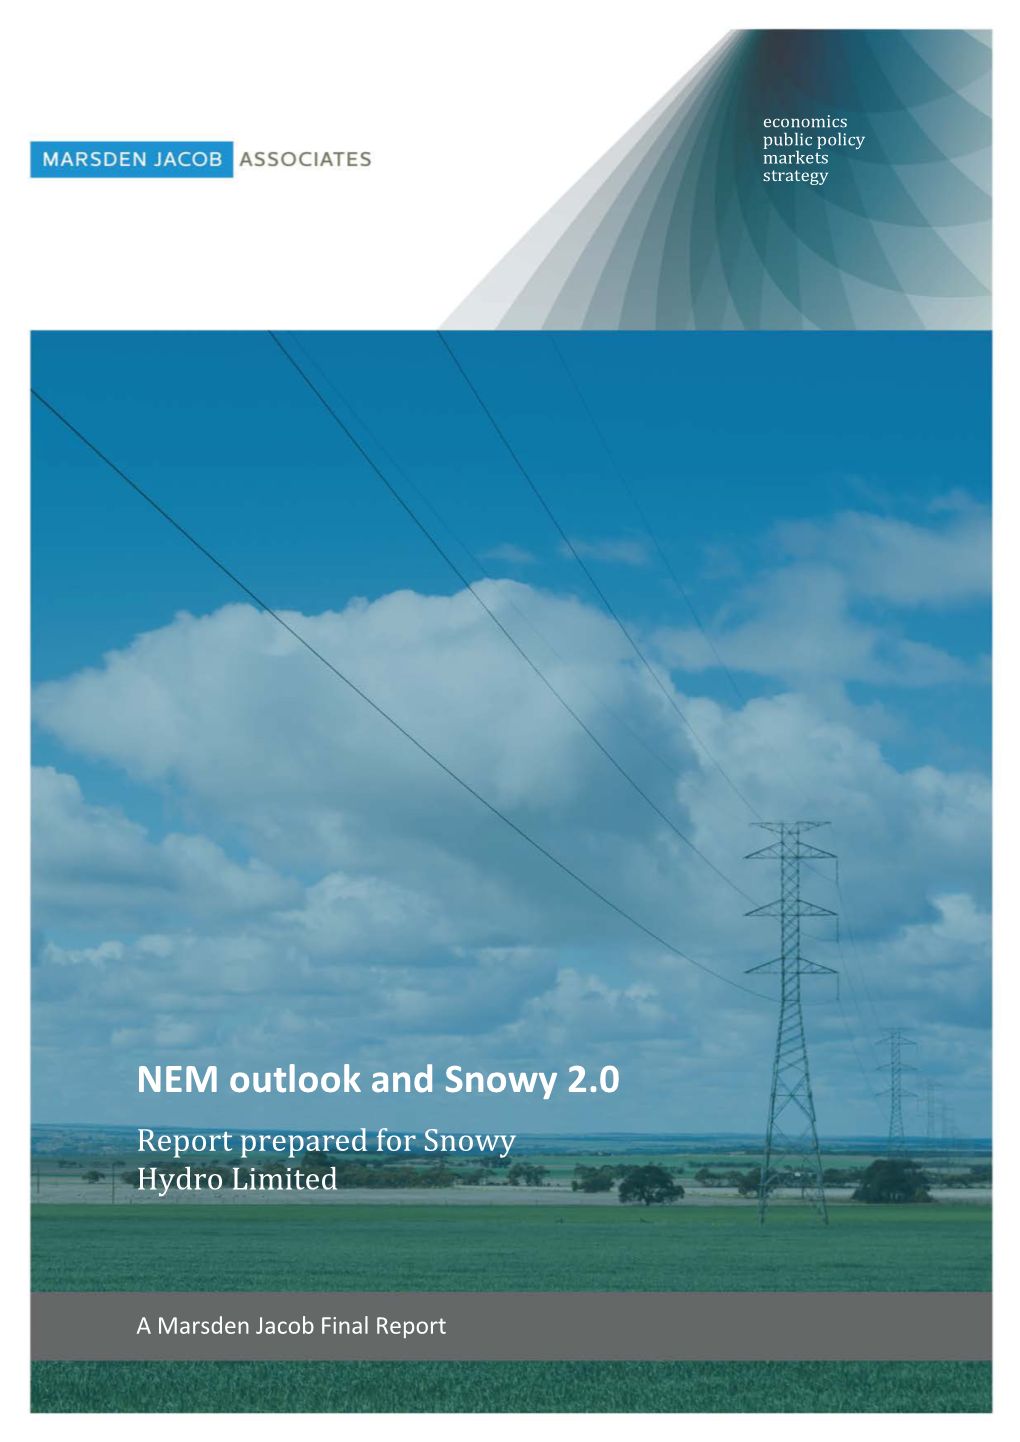 NEM Outlook and Snowy 2.0 Report Prepared for Snowy Hydro Limited